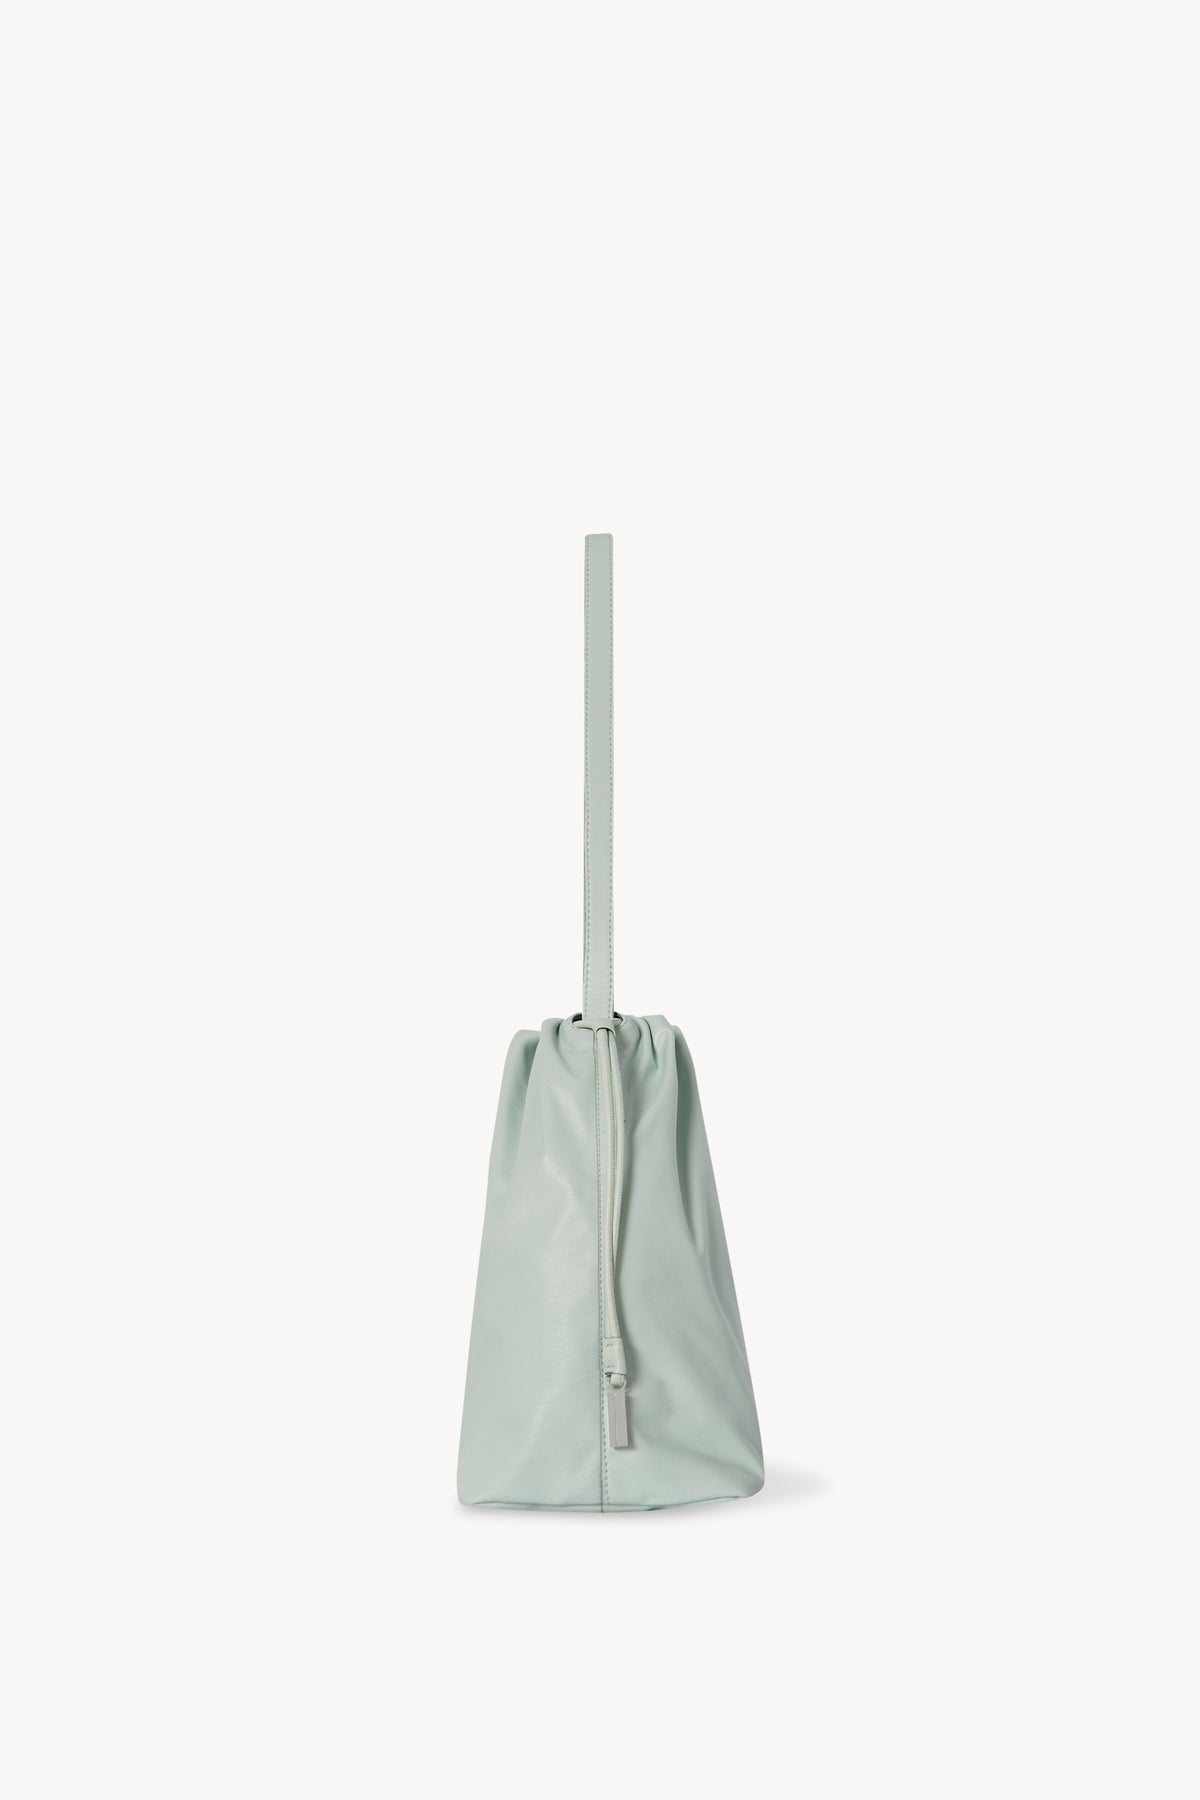 Angy Shoulder Bag in Leather